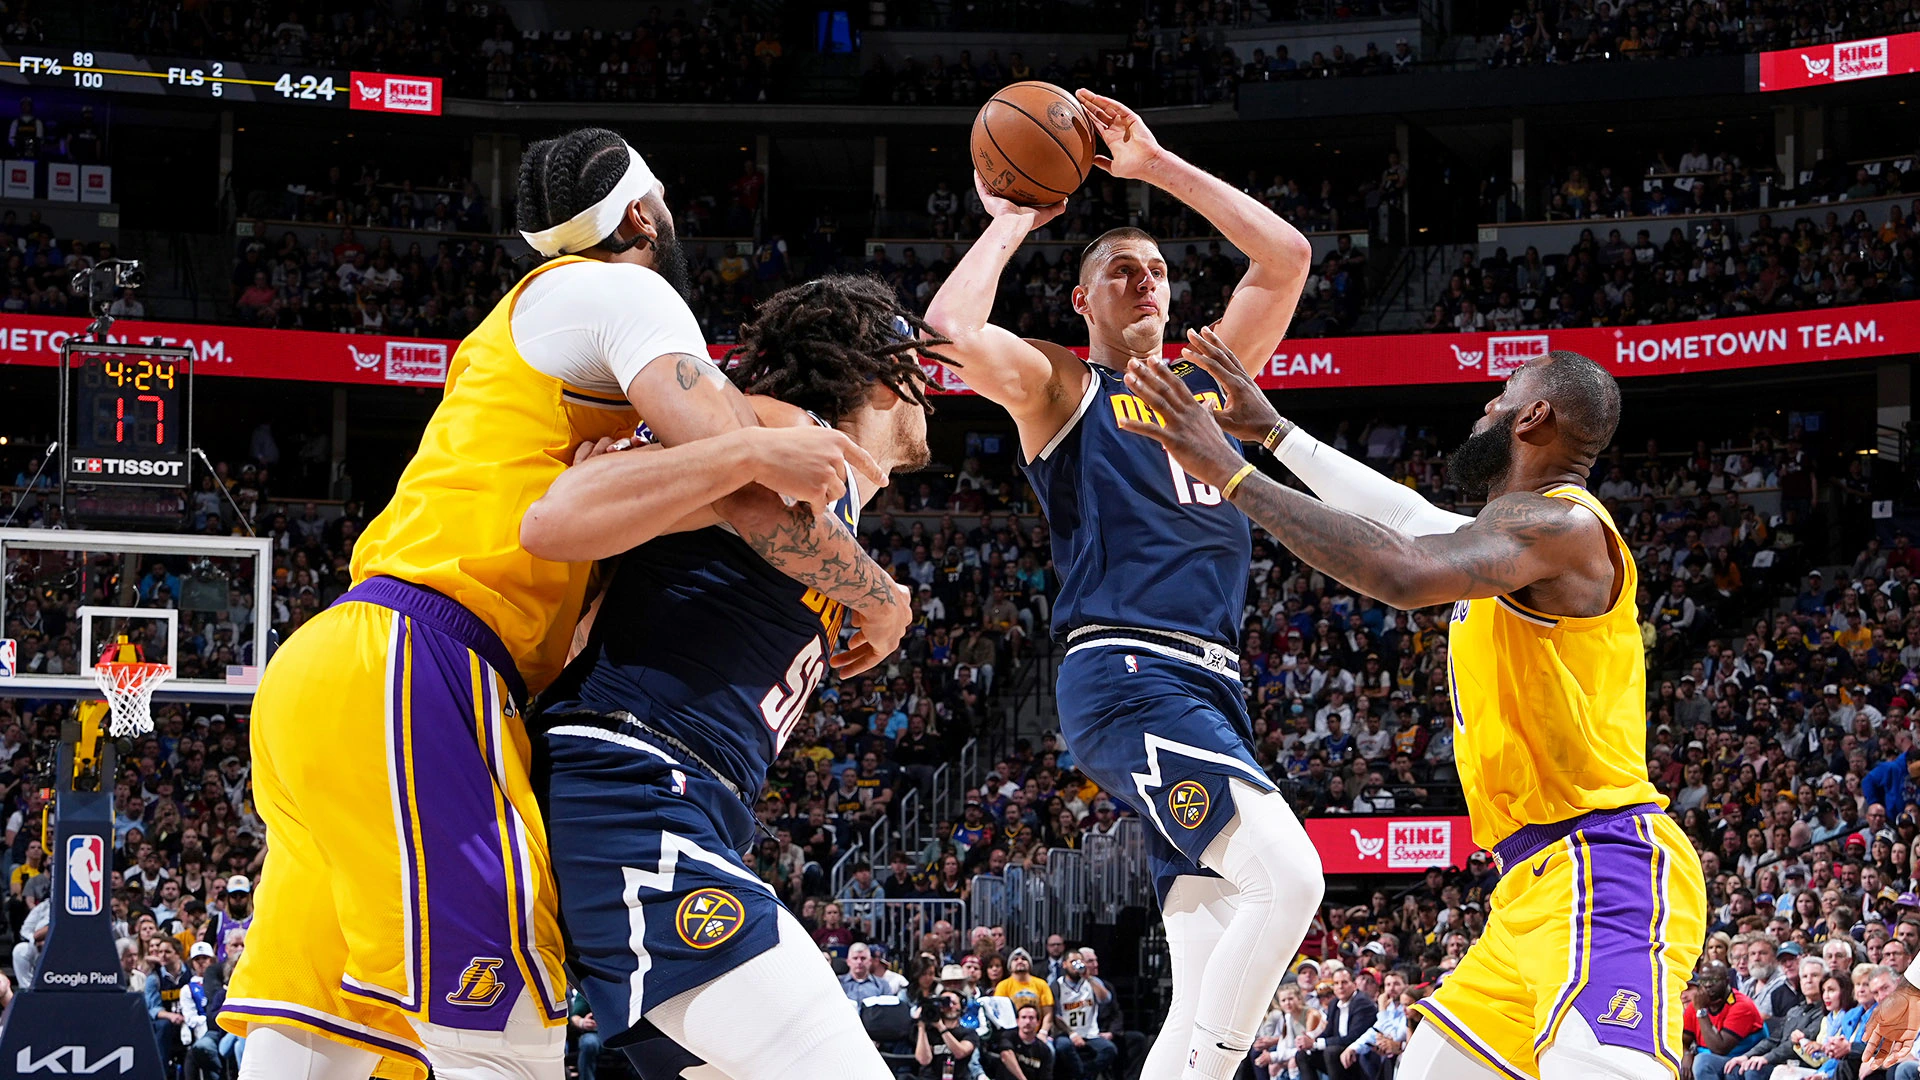 Lakers vs. Nuggets: An Unlikely Turnaround Spearheaded by LeBron James?